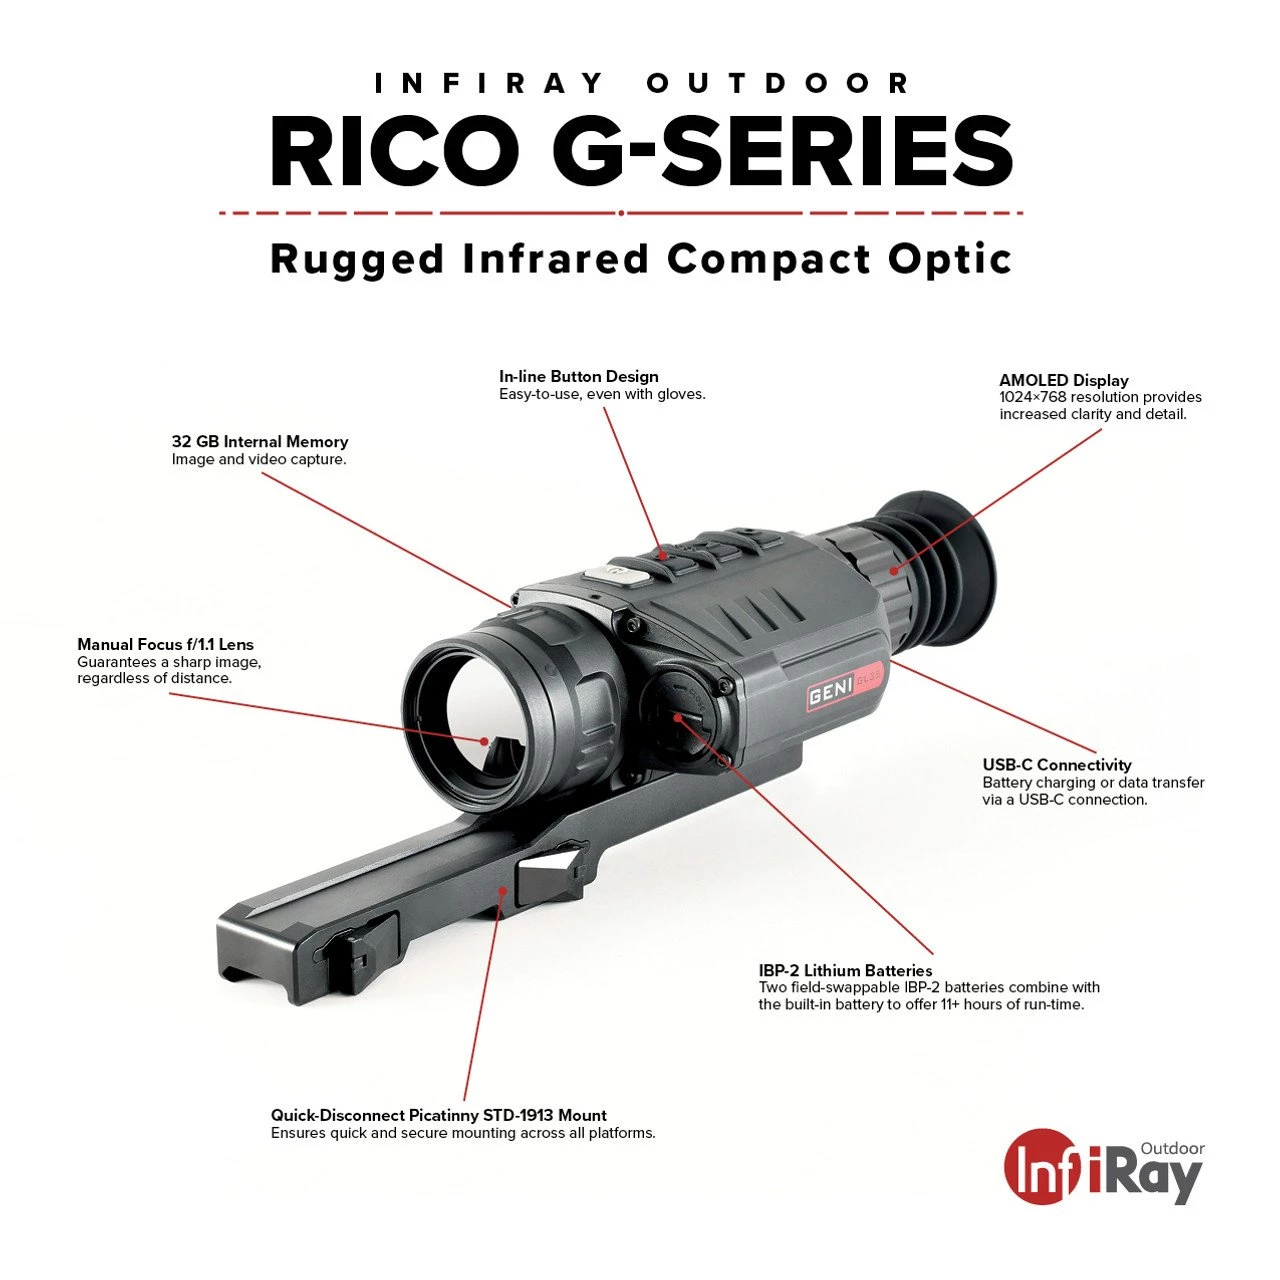 RICO G GH50 640 3X 50mm Thermal Weapon Sight